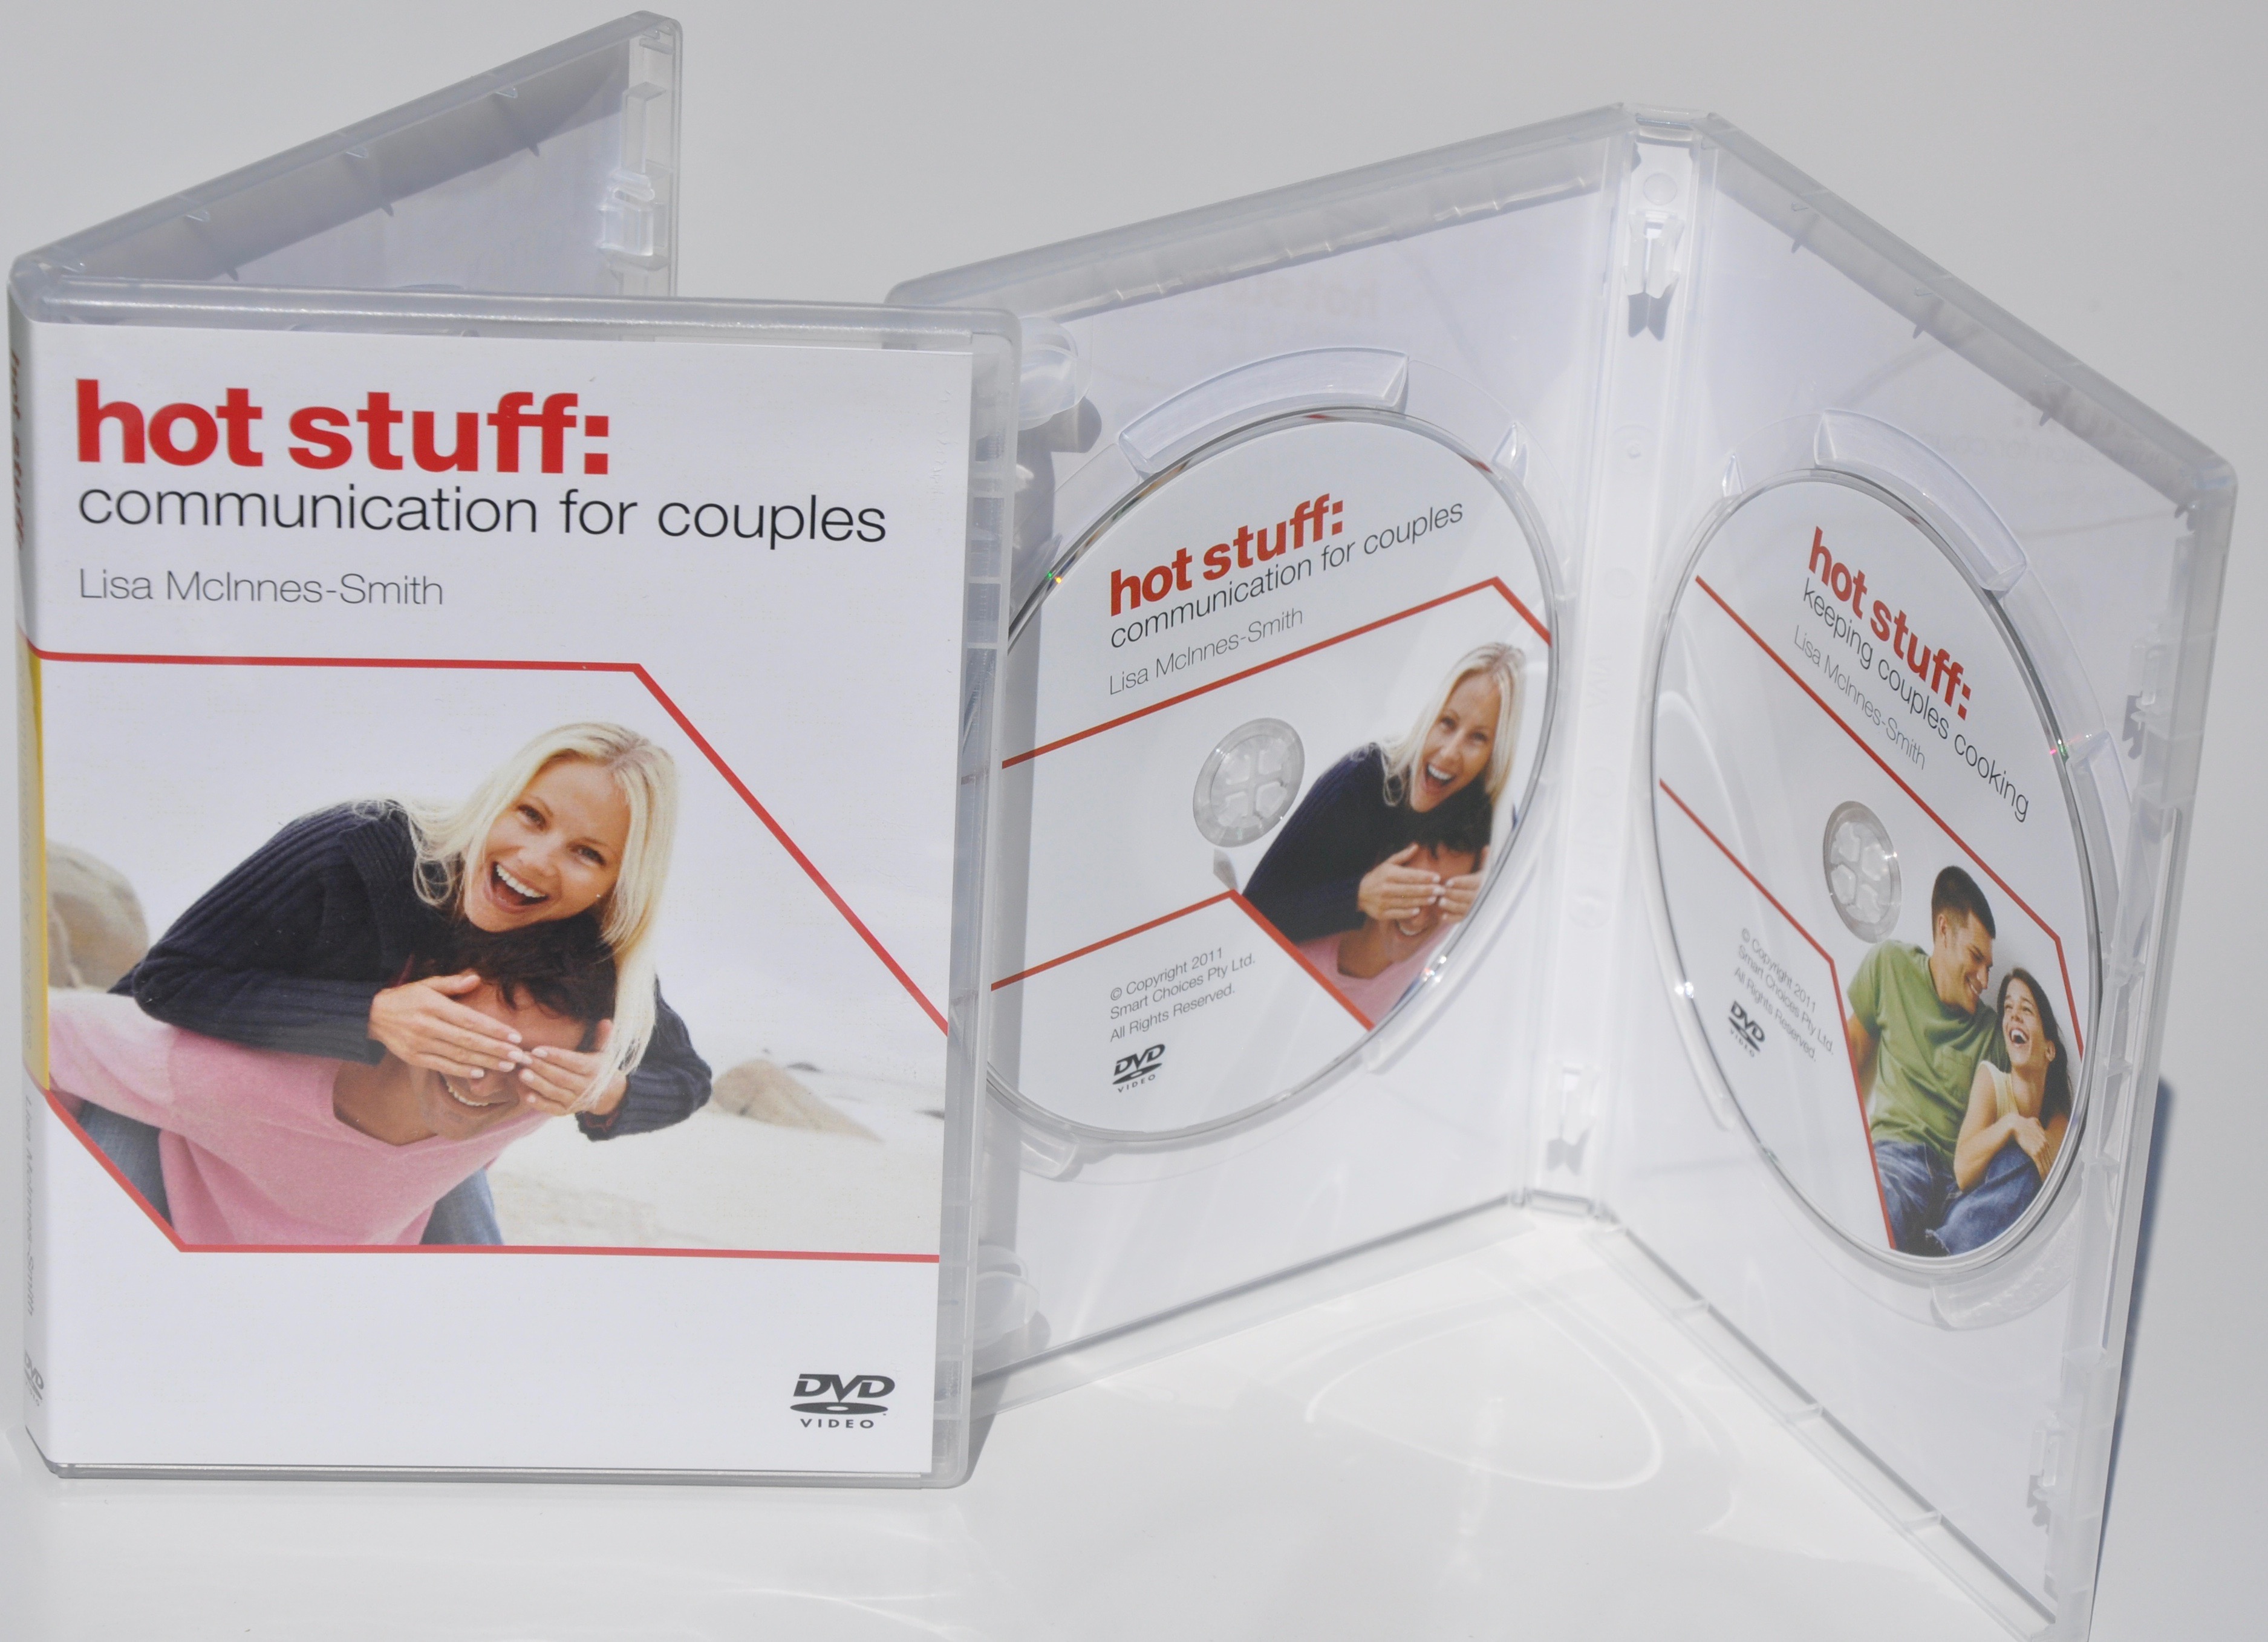 HOT STUFF: Communication for Couples